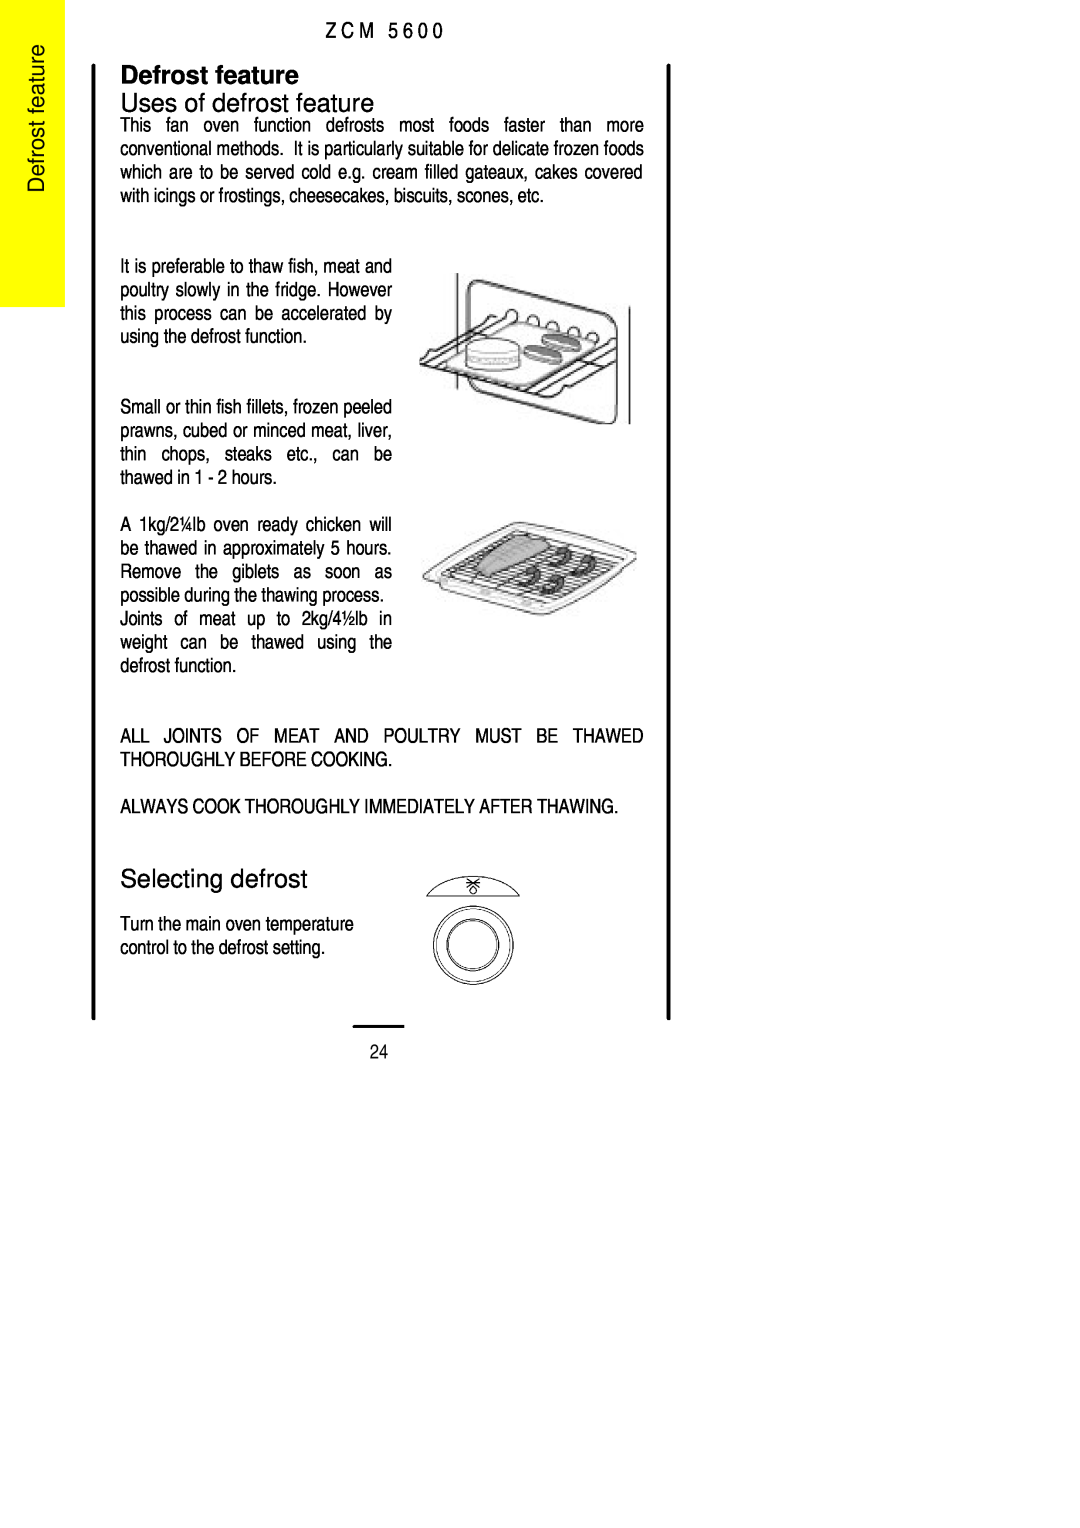 Zanussi ZCM 5600 manual Defrost feature, Uses of defrost feature, Selecting defrost, Z C M 5 